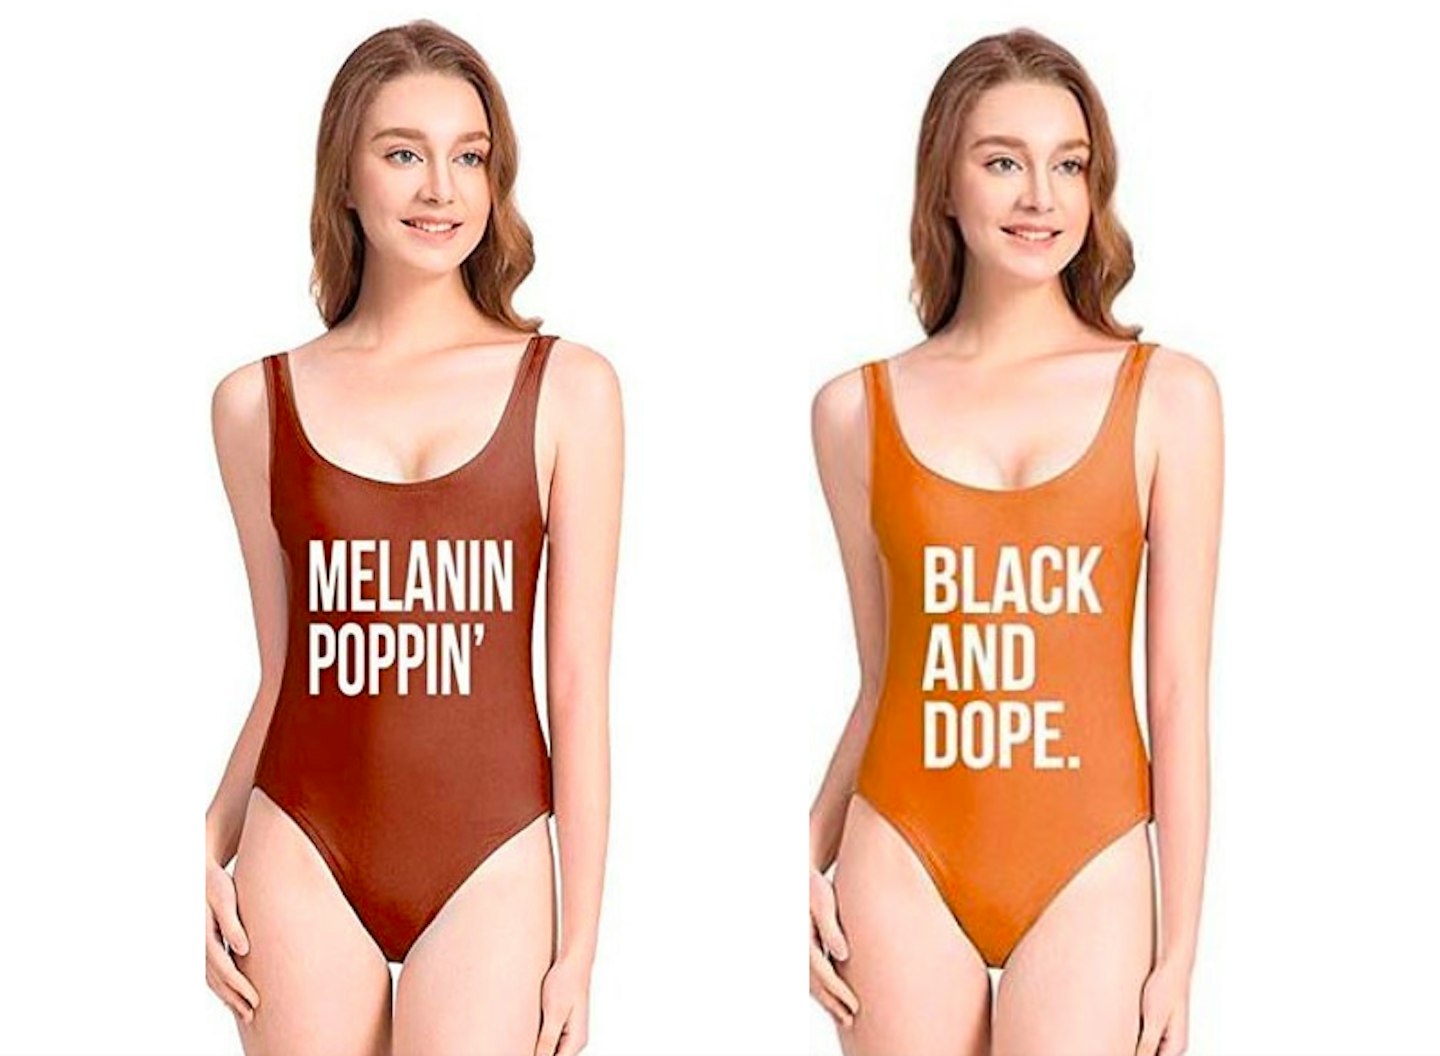 Melanin Poppin, Black and Dope Swimsuits